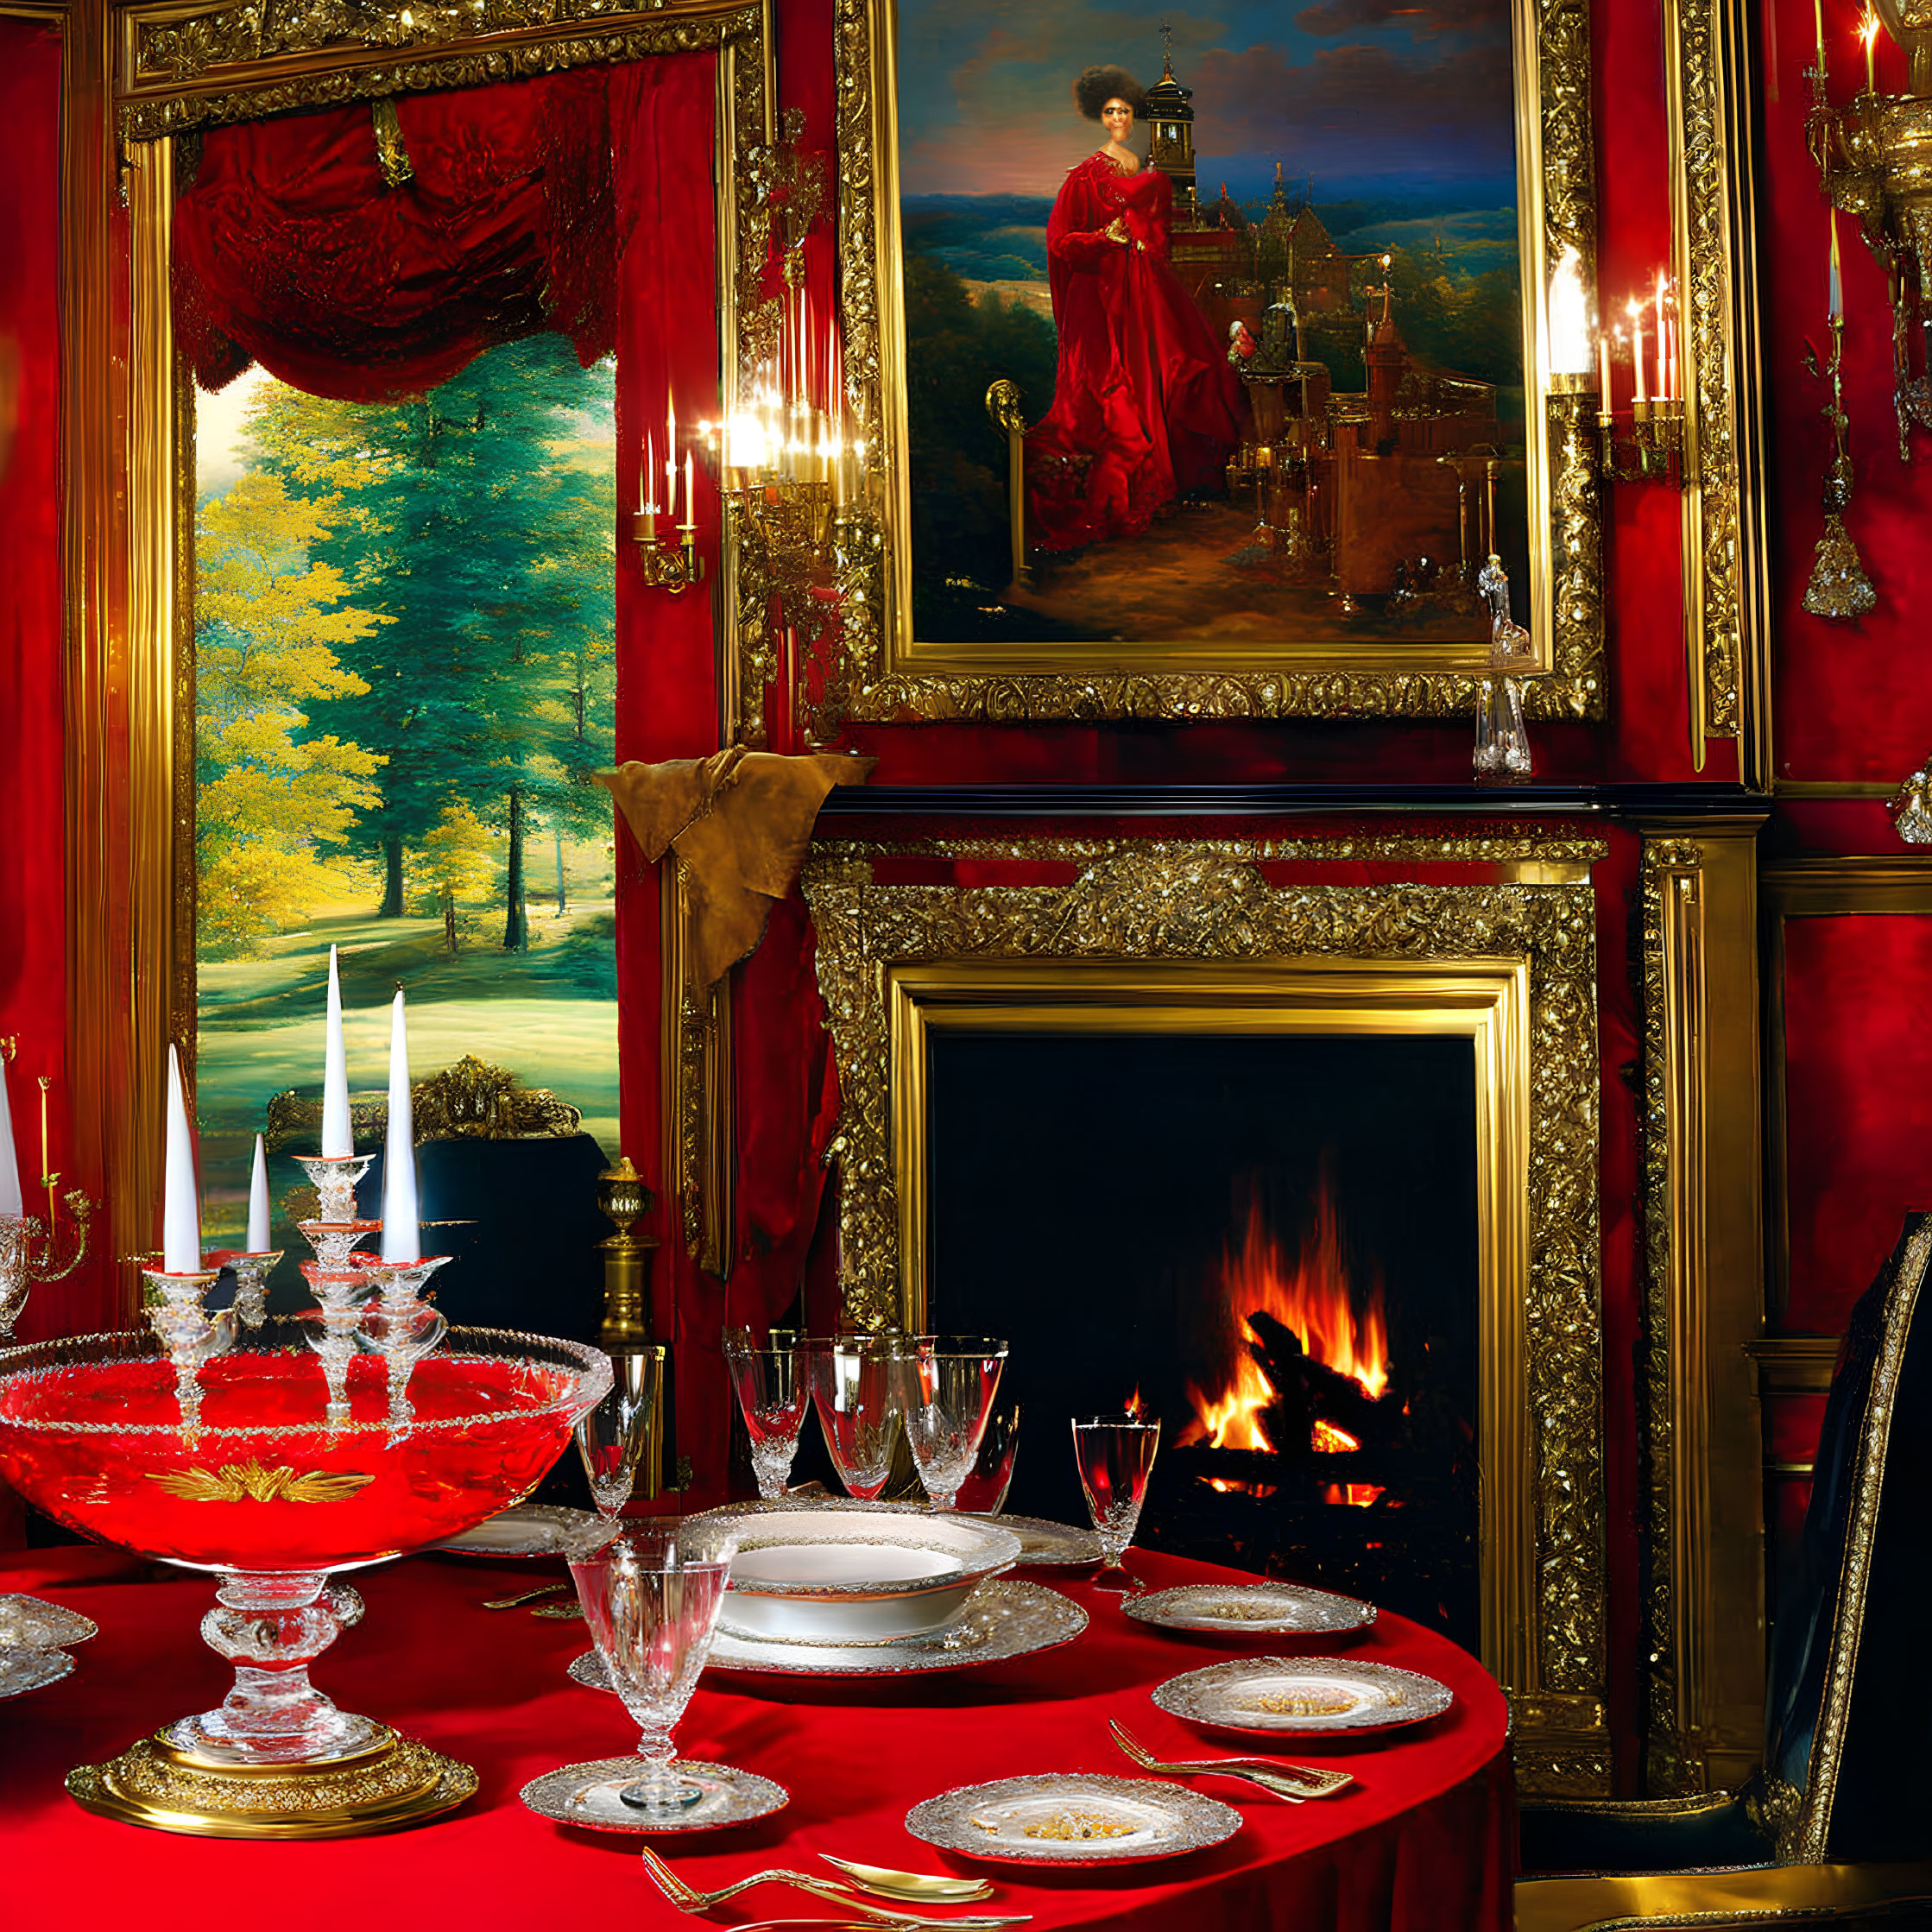 Luxurious dining room with set table, lit fireplace, and large painting of woman in red dress.